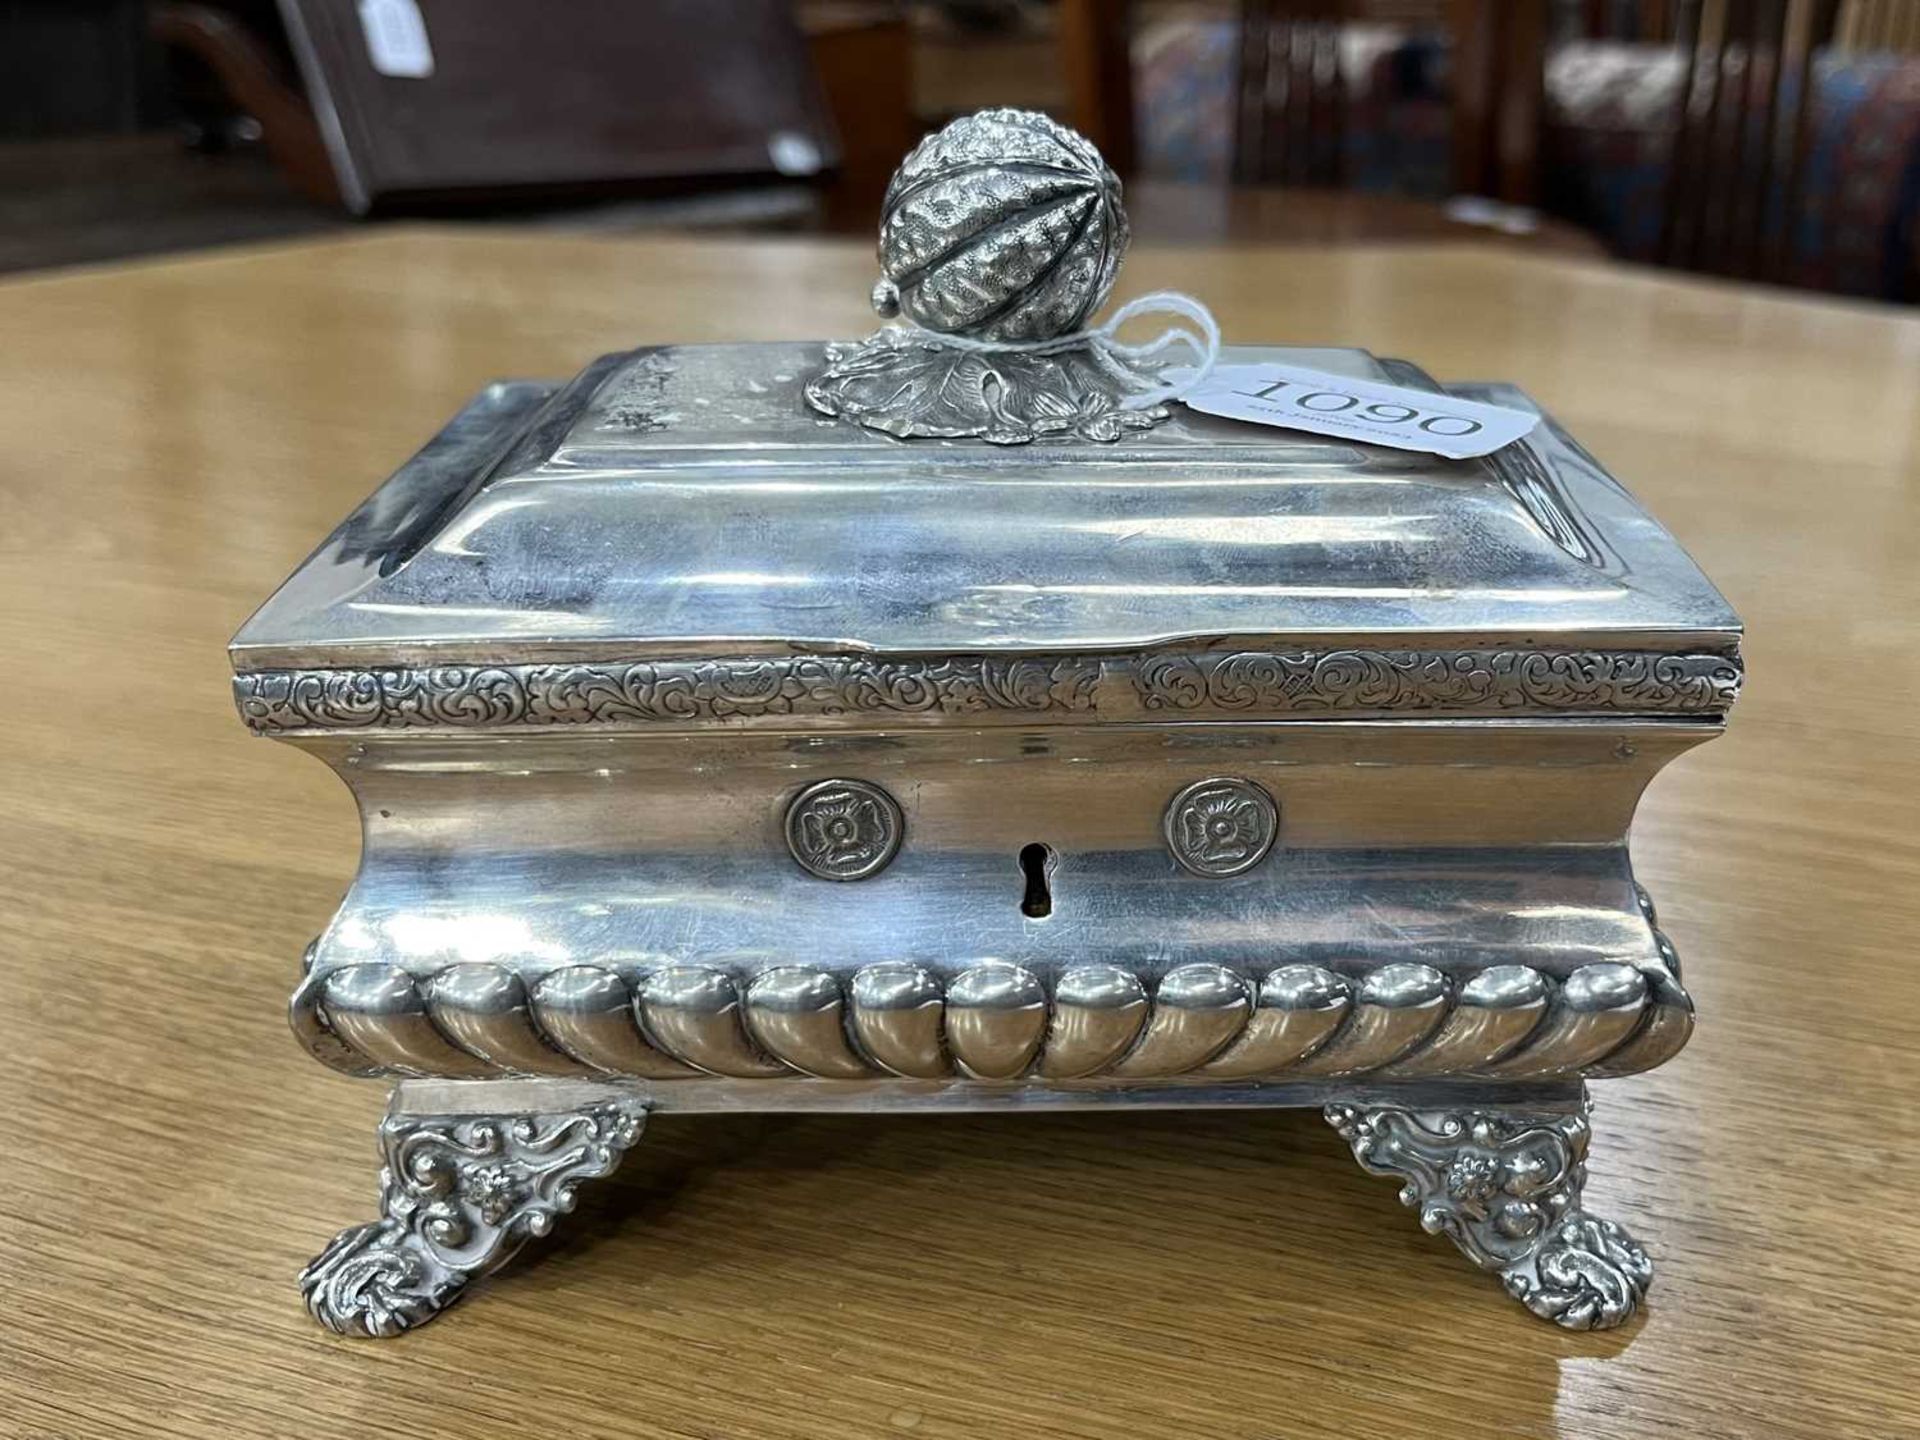 A MID-19TH CENTURY GERMAN SILVER TEA CADDY - Image 10 of 17